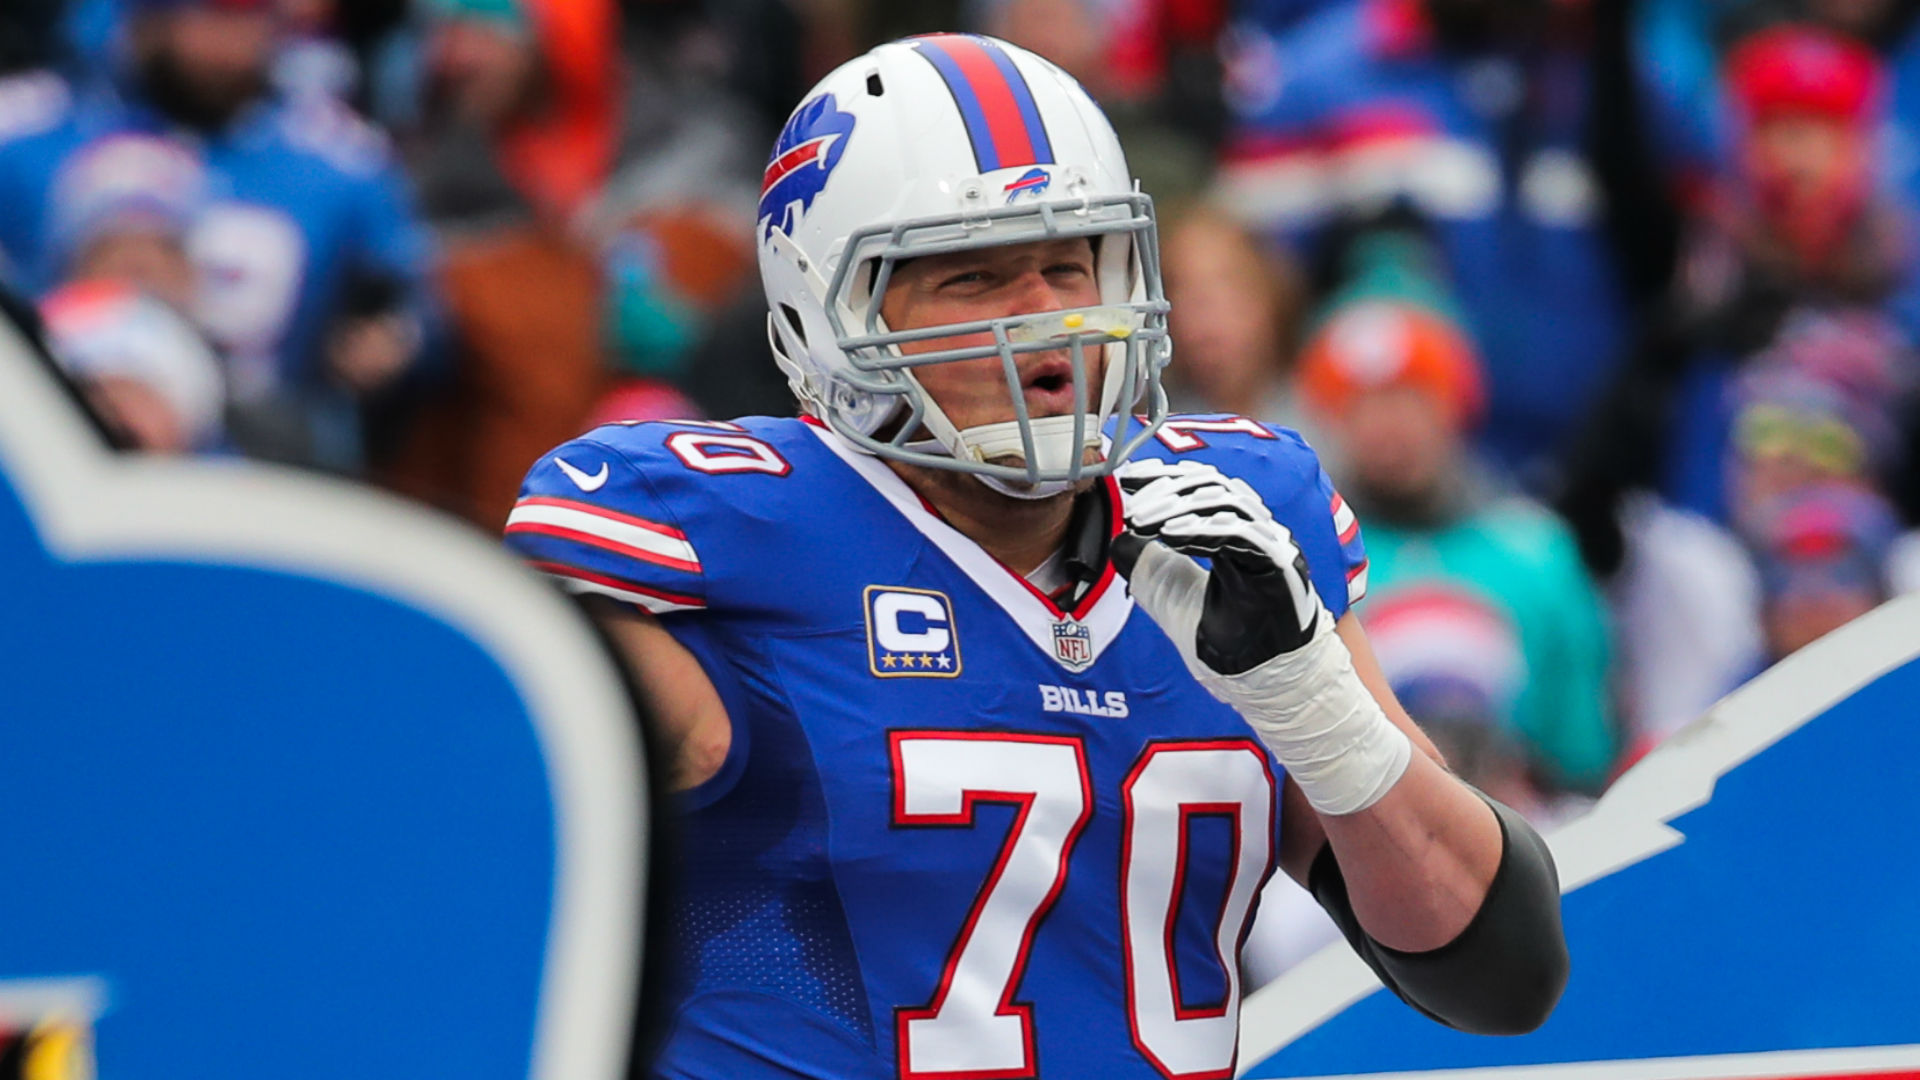 Chance to see birth of son gives Eric Wood silver lining to Bills' playoff loss